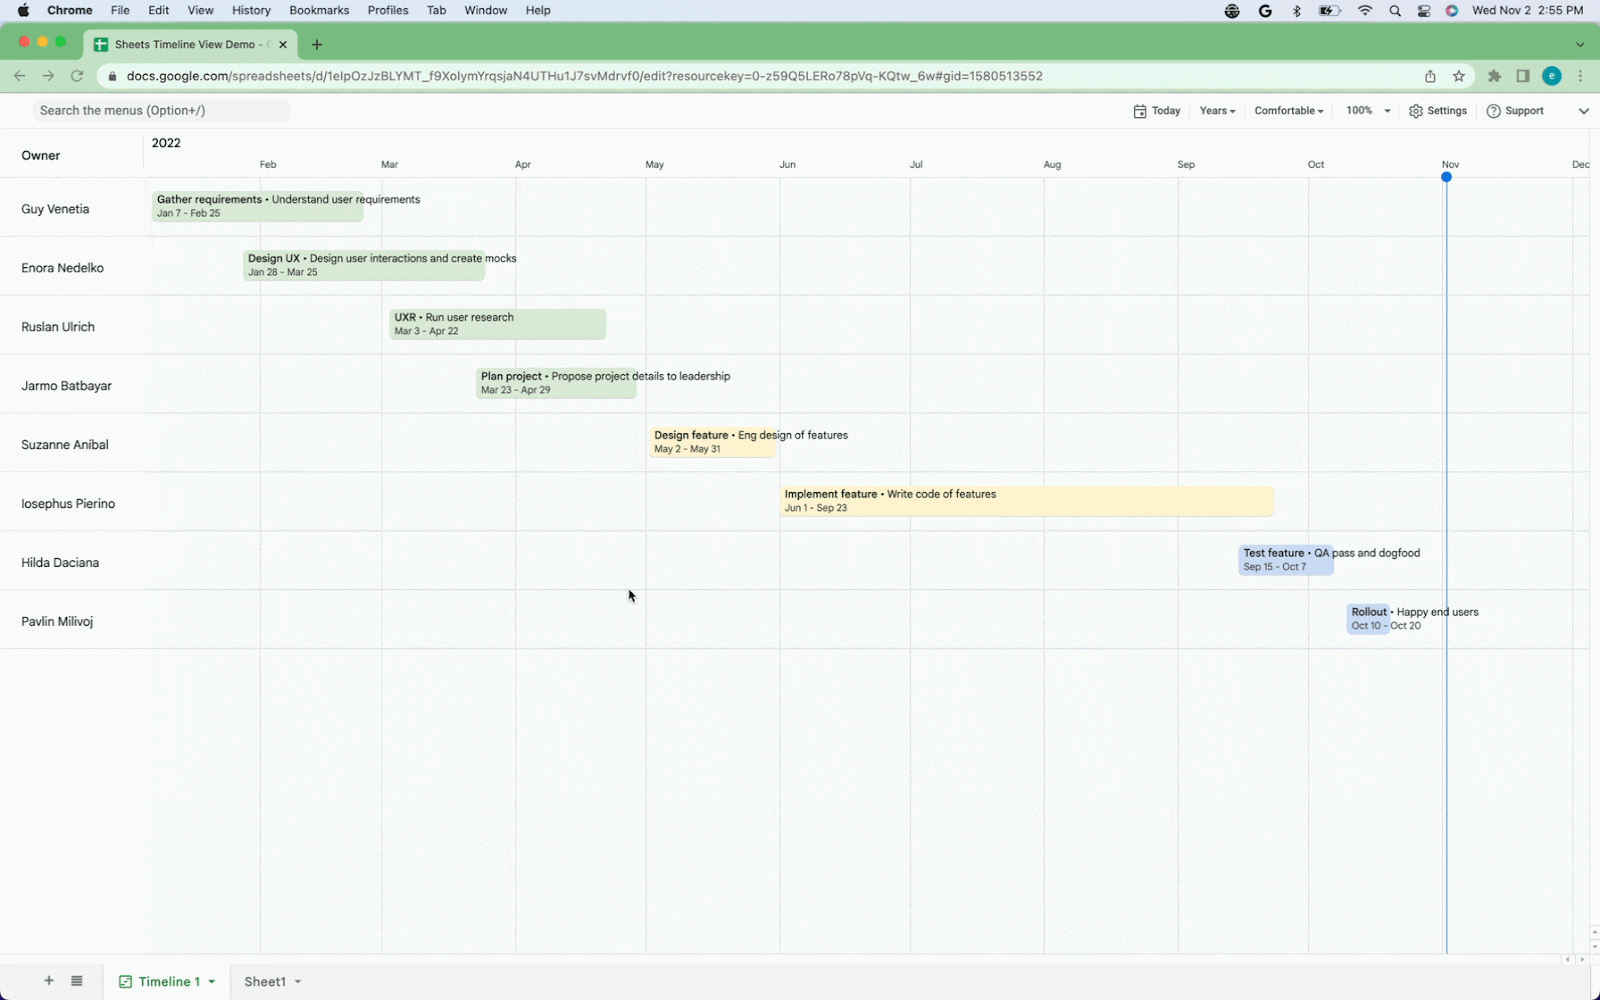 Manage projects with timeline view